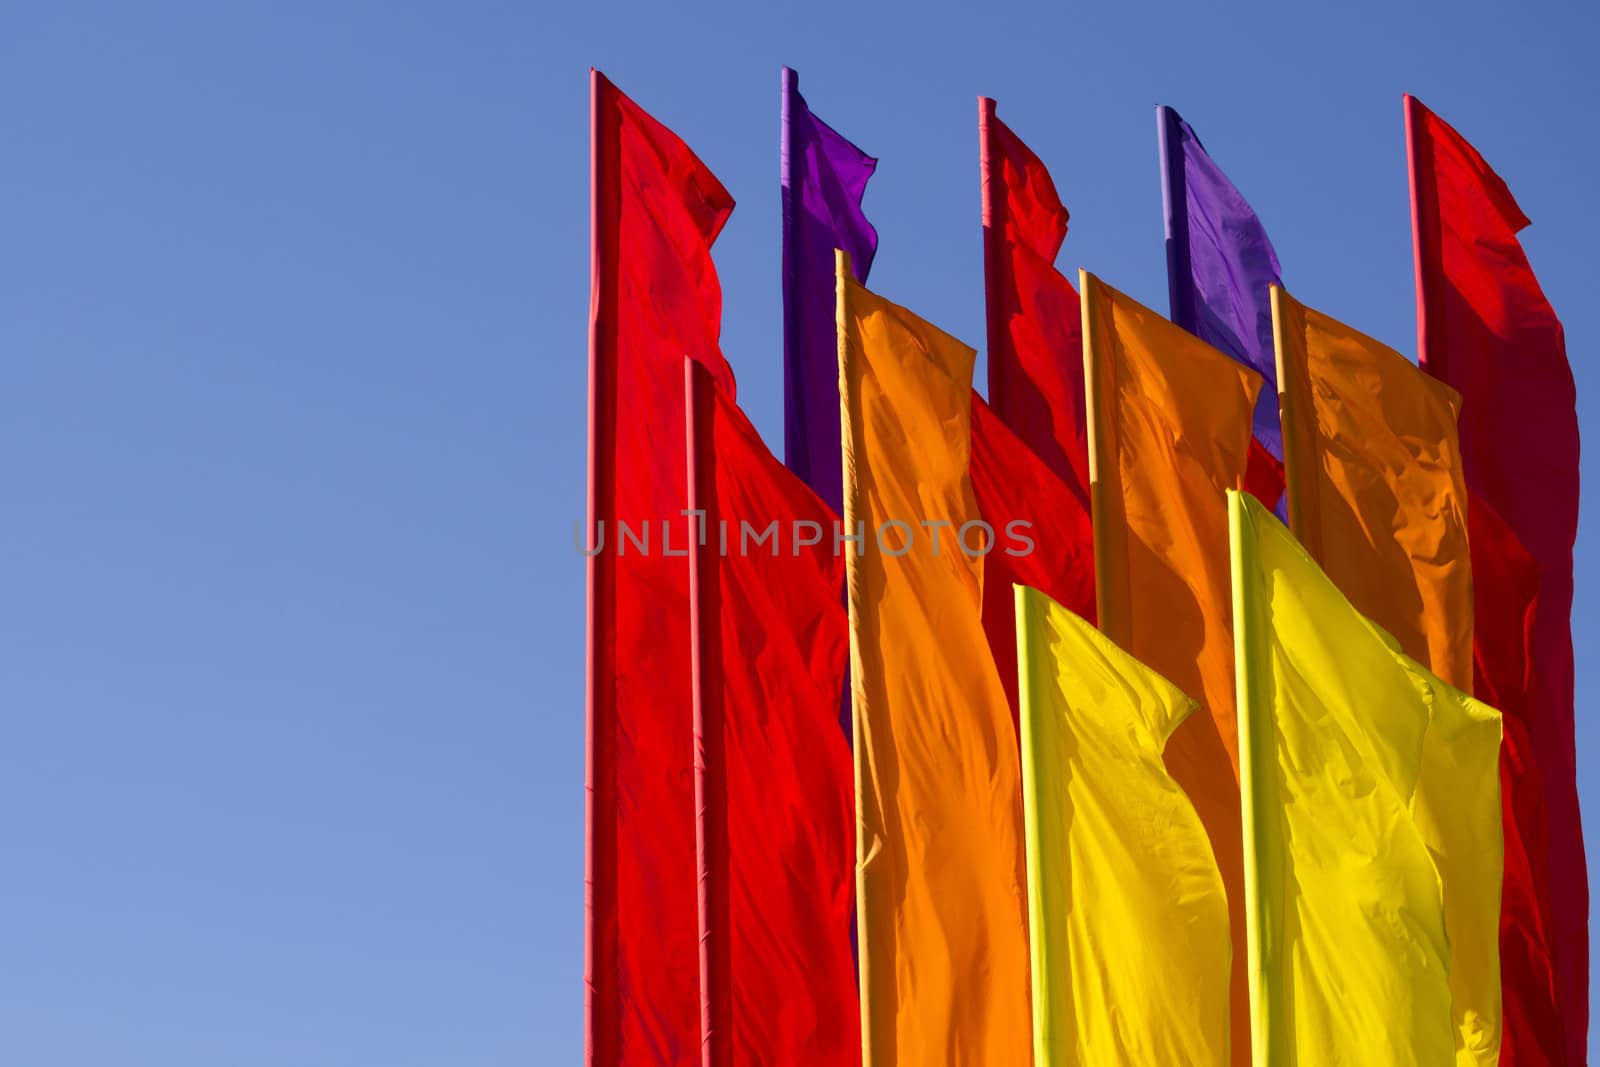 many color flags on the wind with clear blue sky behind